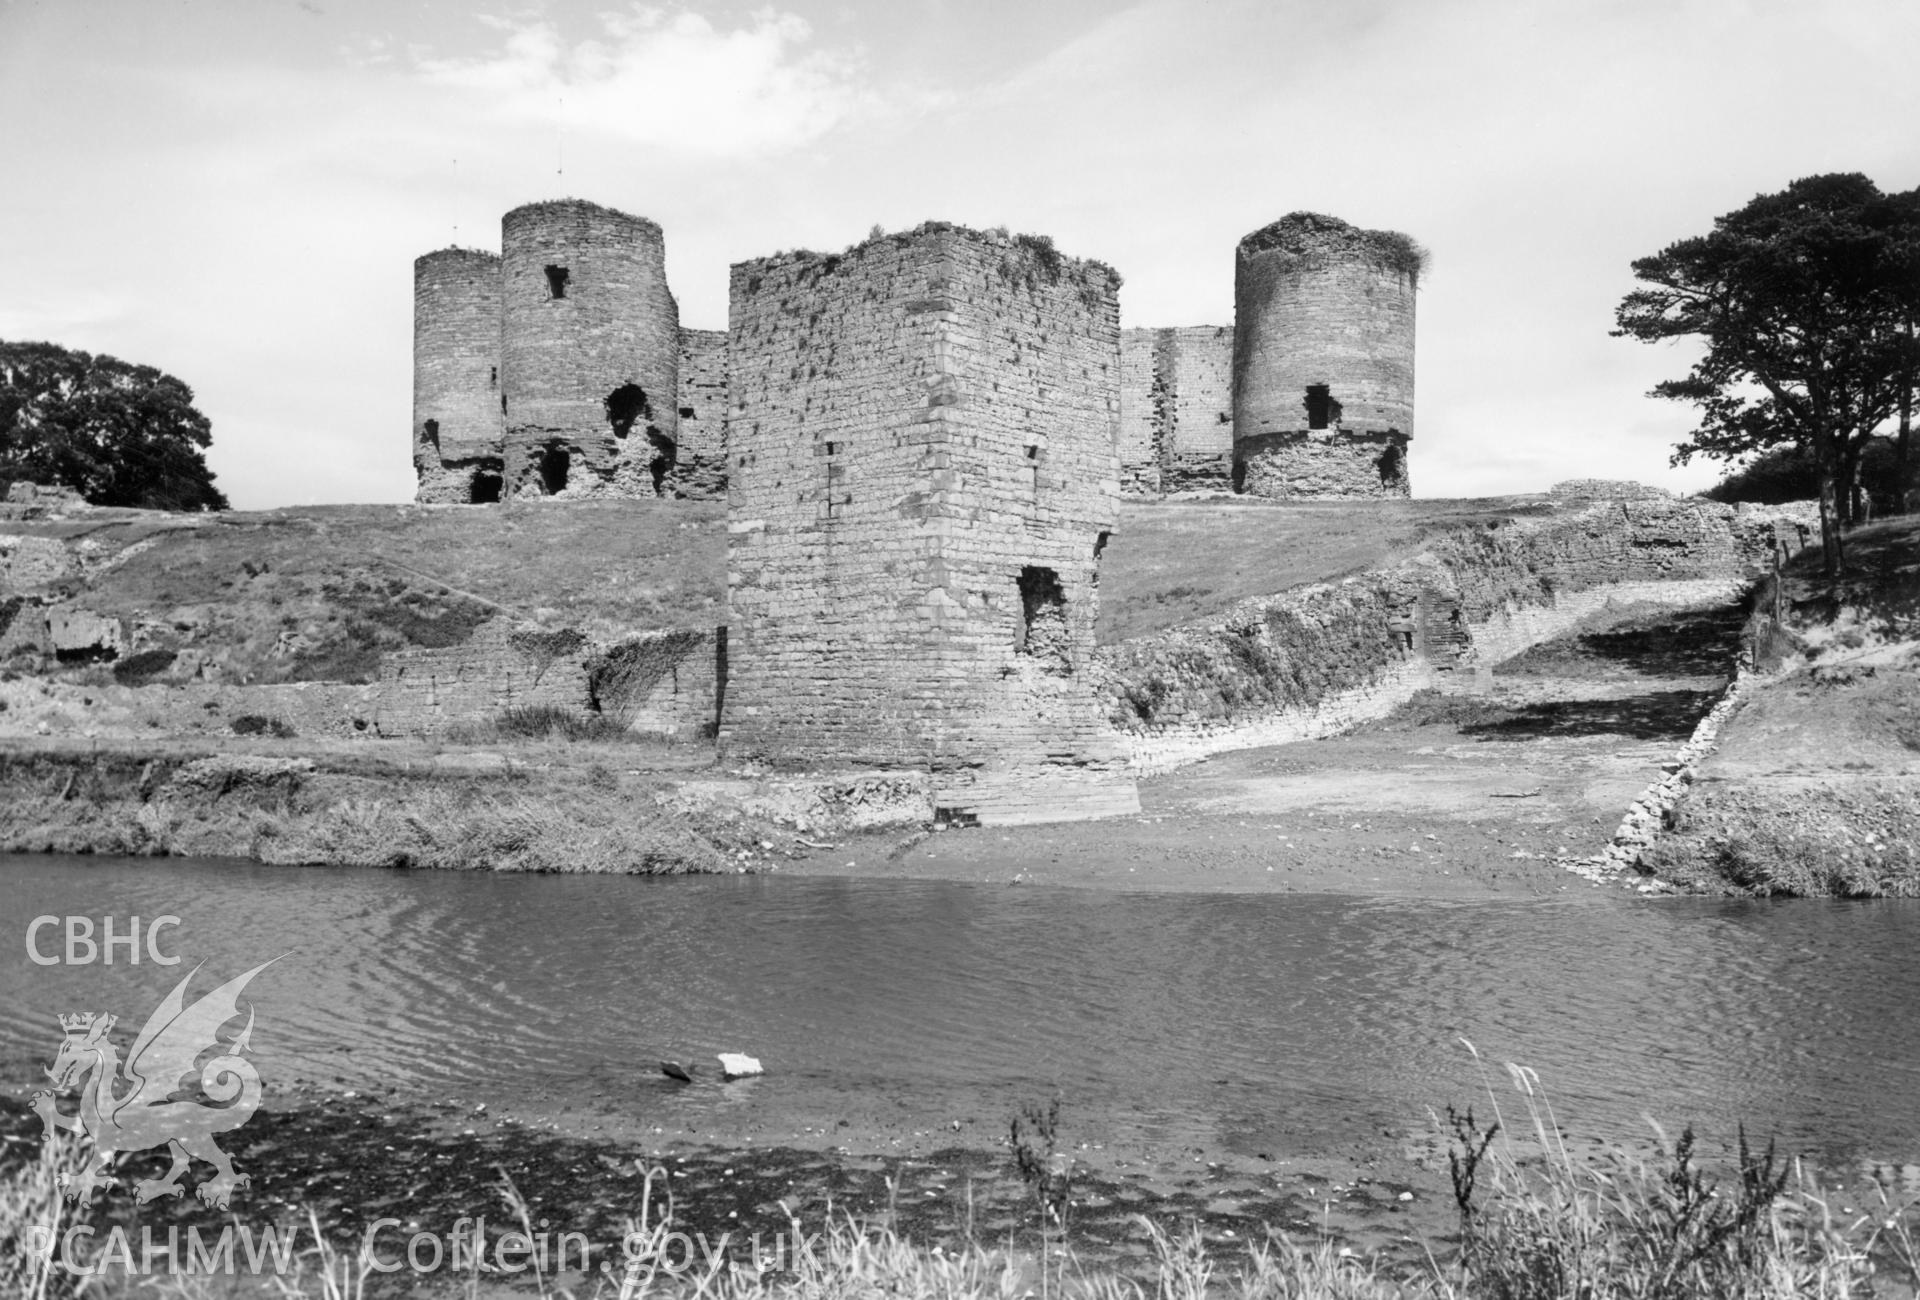 1 b/w print showing view of Rhuddlan castle, collated by the former Central Office of Information.